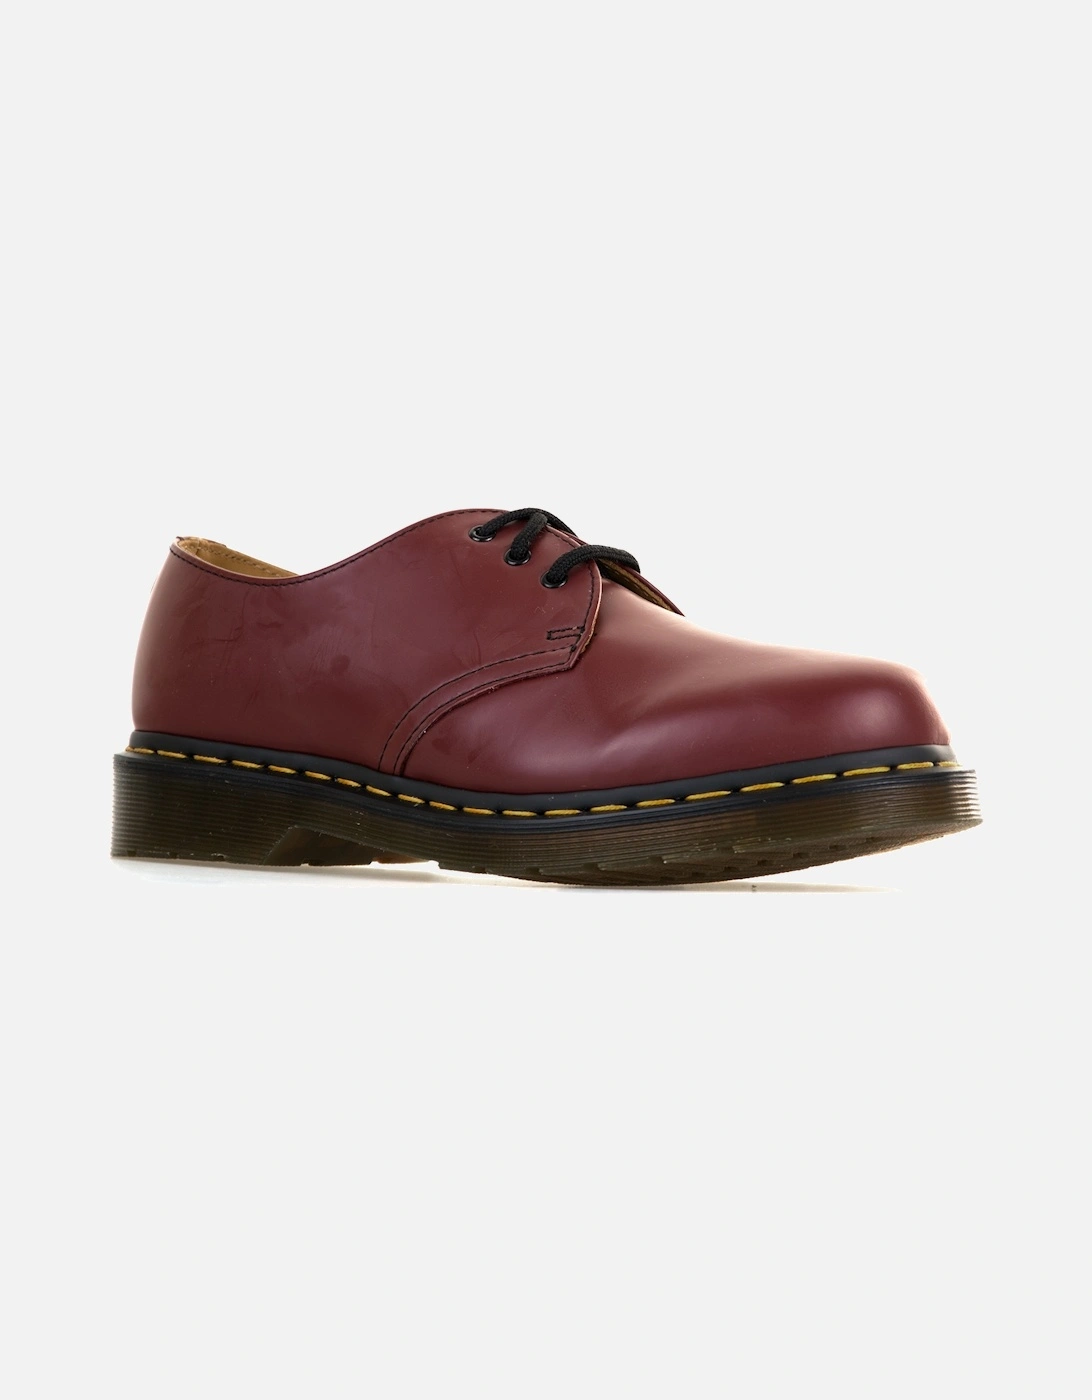 Dr. Martens Unisex Adults 1461 3 Eye Shoes (Cherry), 6 of 5